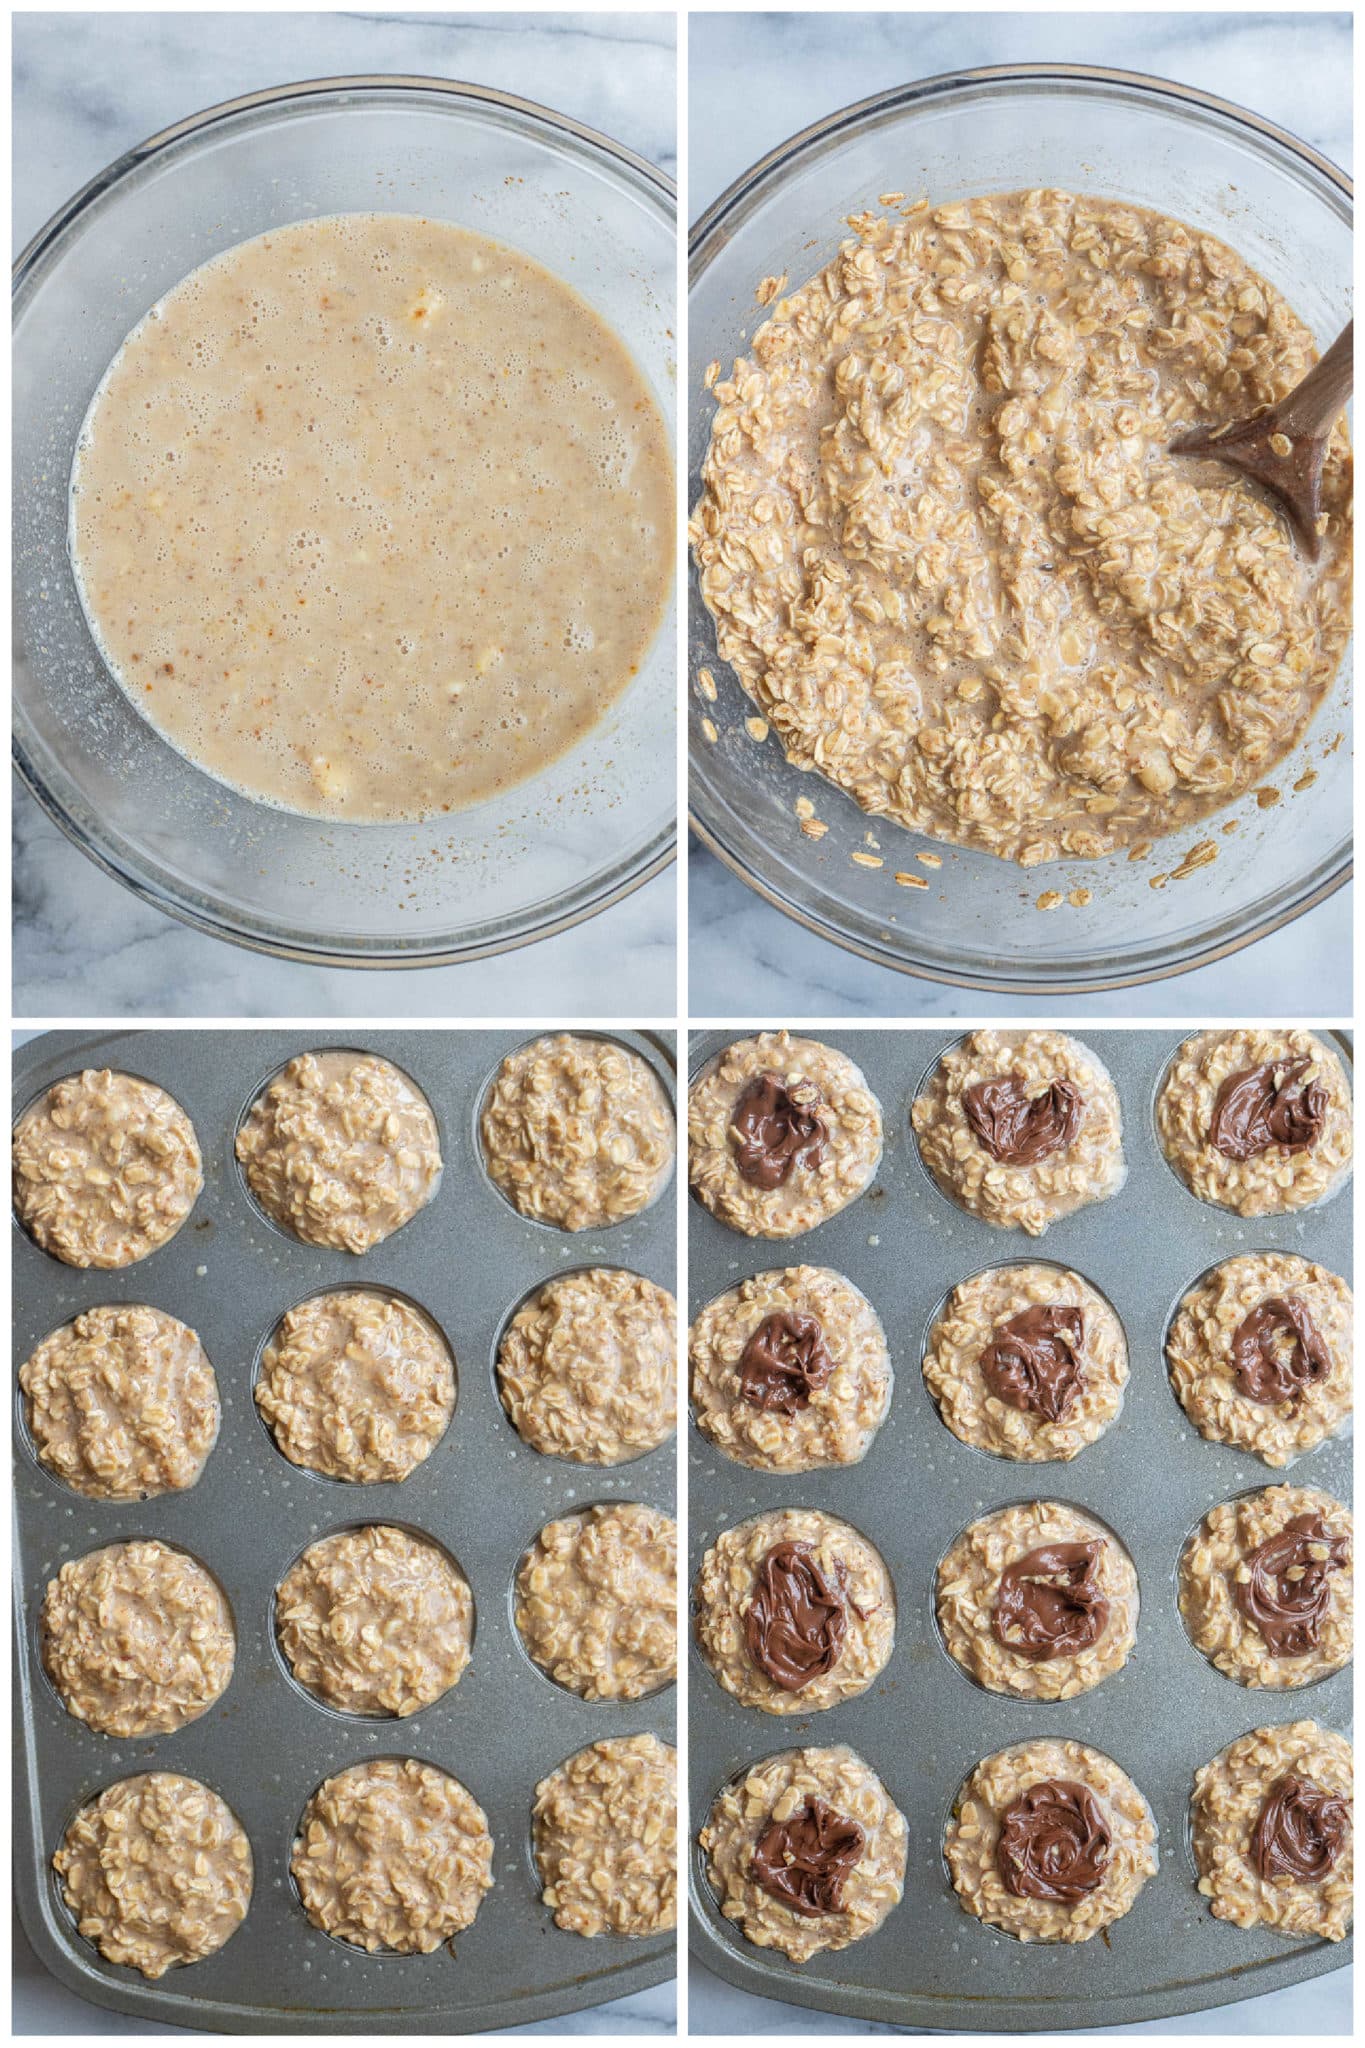 banana oatmeal cup batter being mixed together and put into a muffin tin